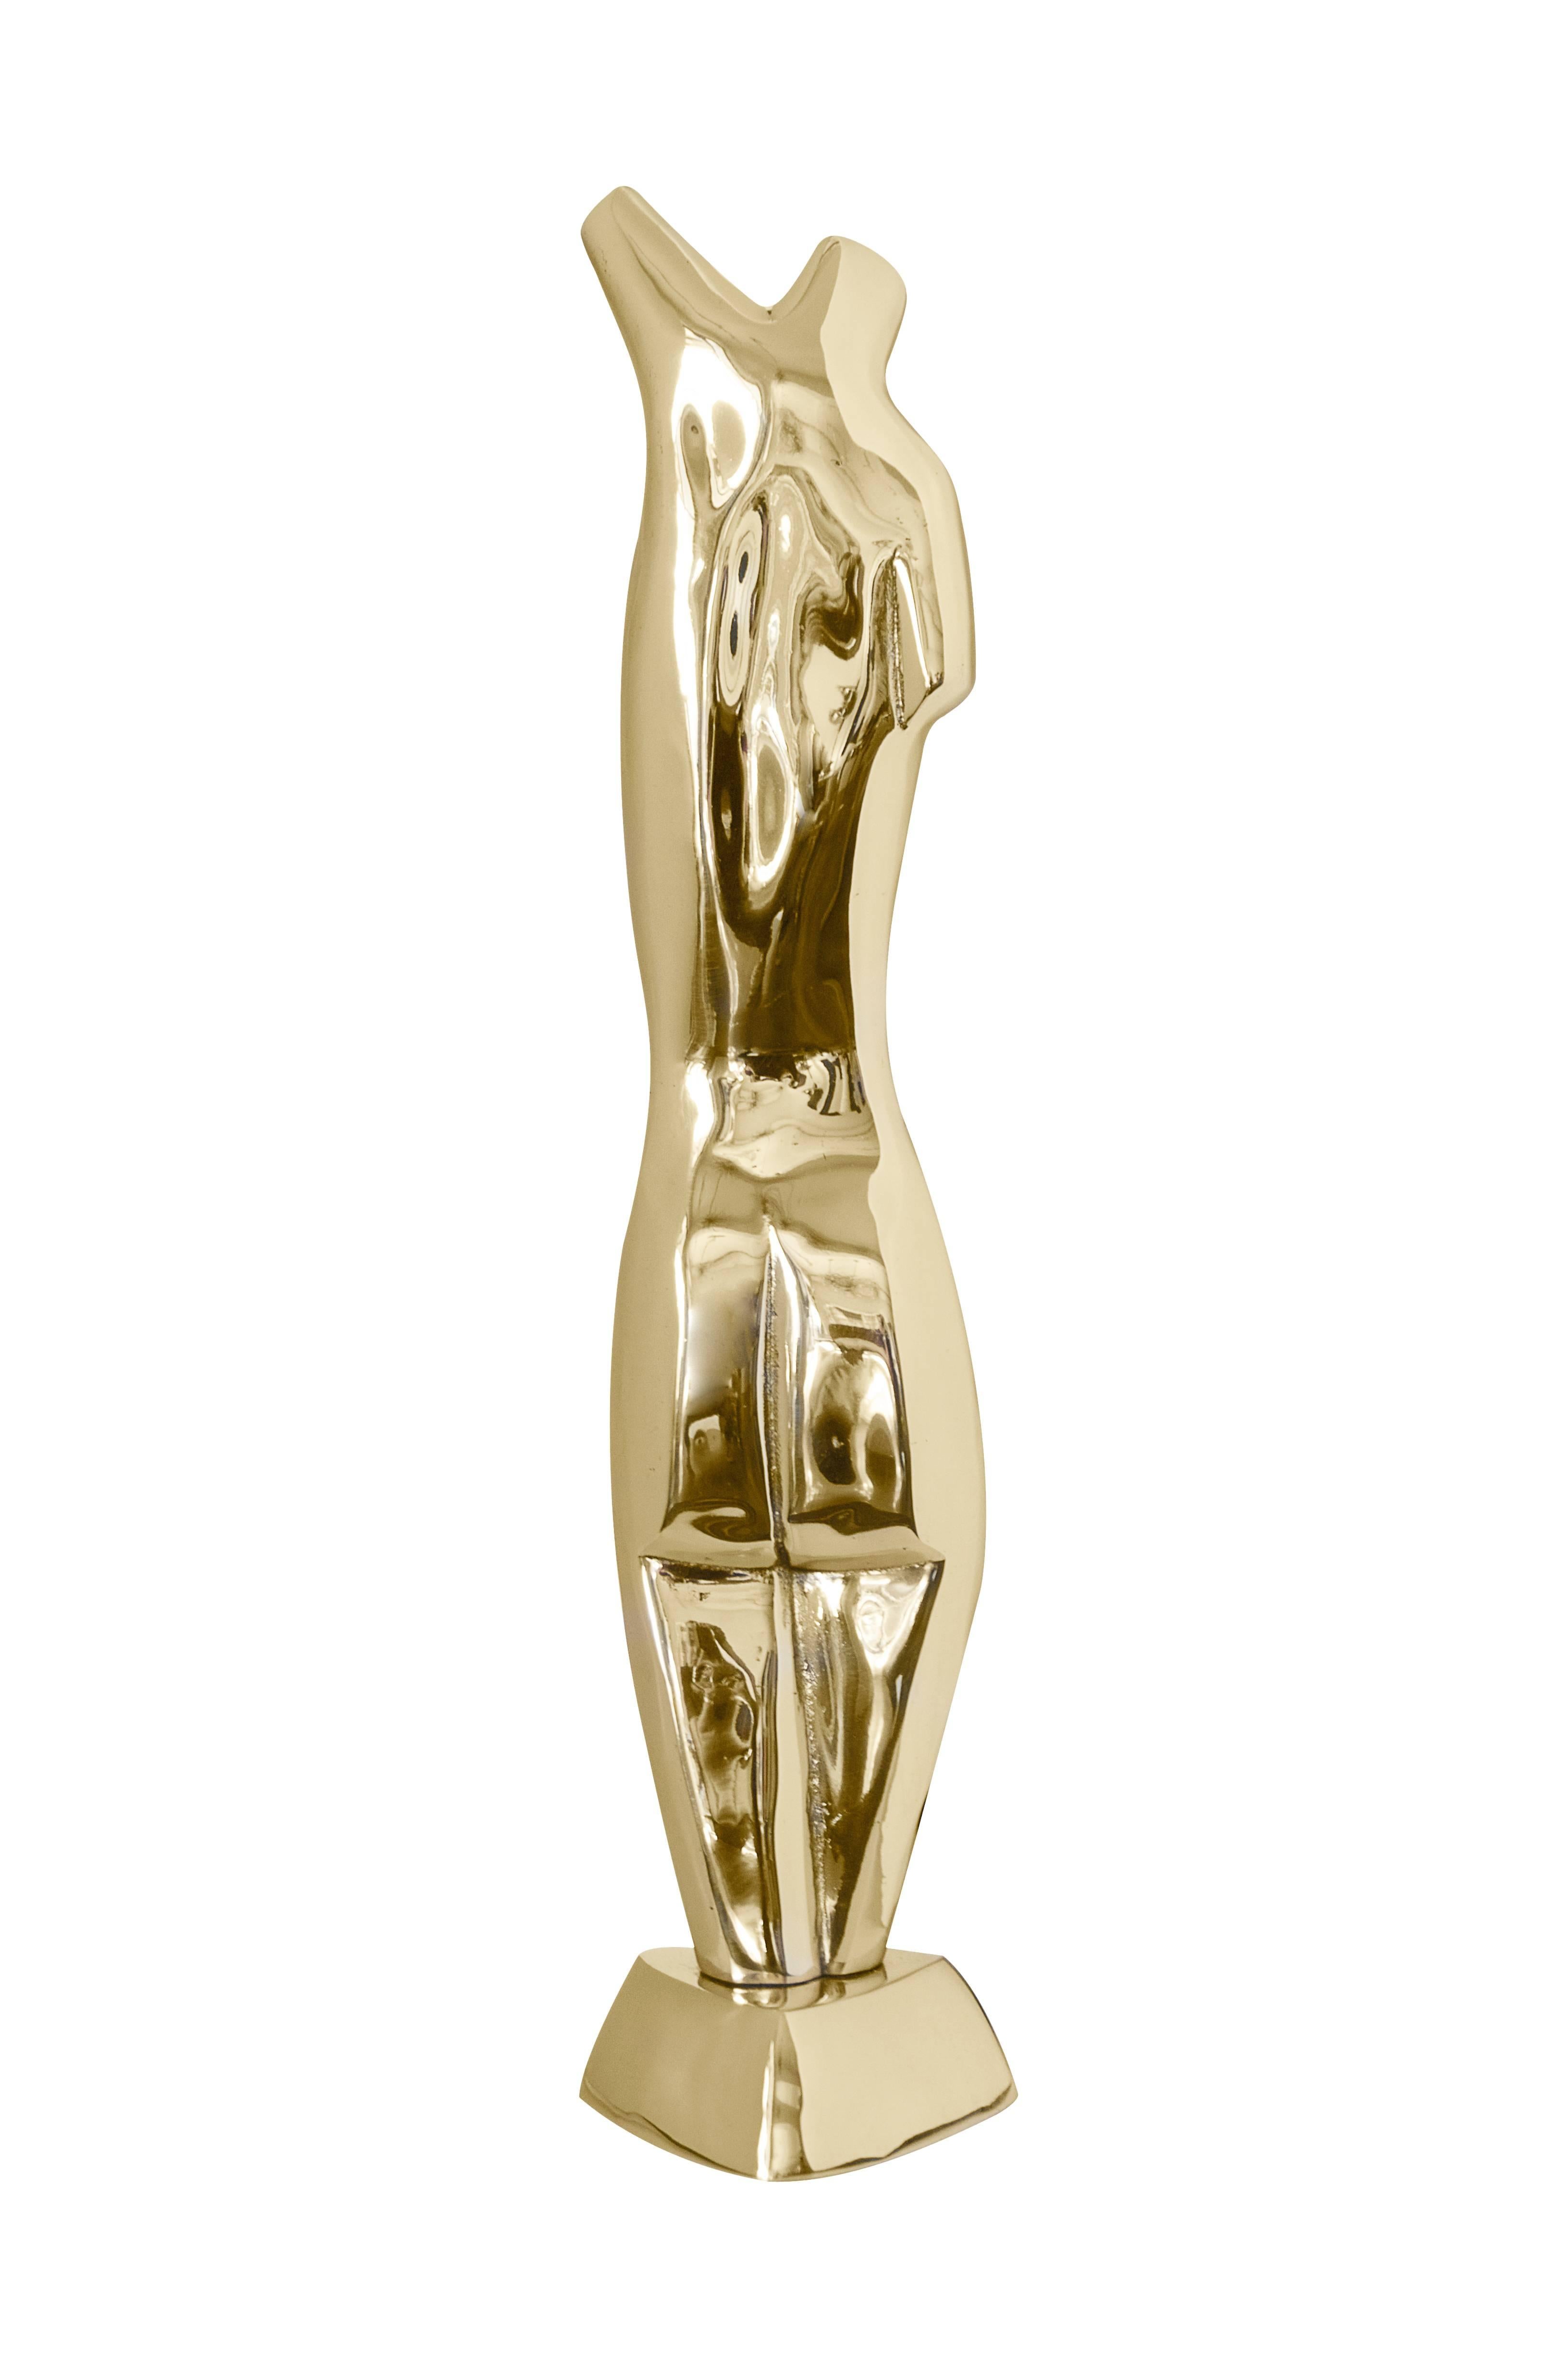 Sinuous polished brass sculpture of a female nude reminiscent of the style of Jean Arp, circa 1970s.